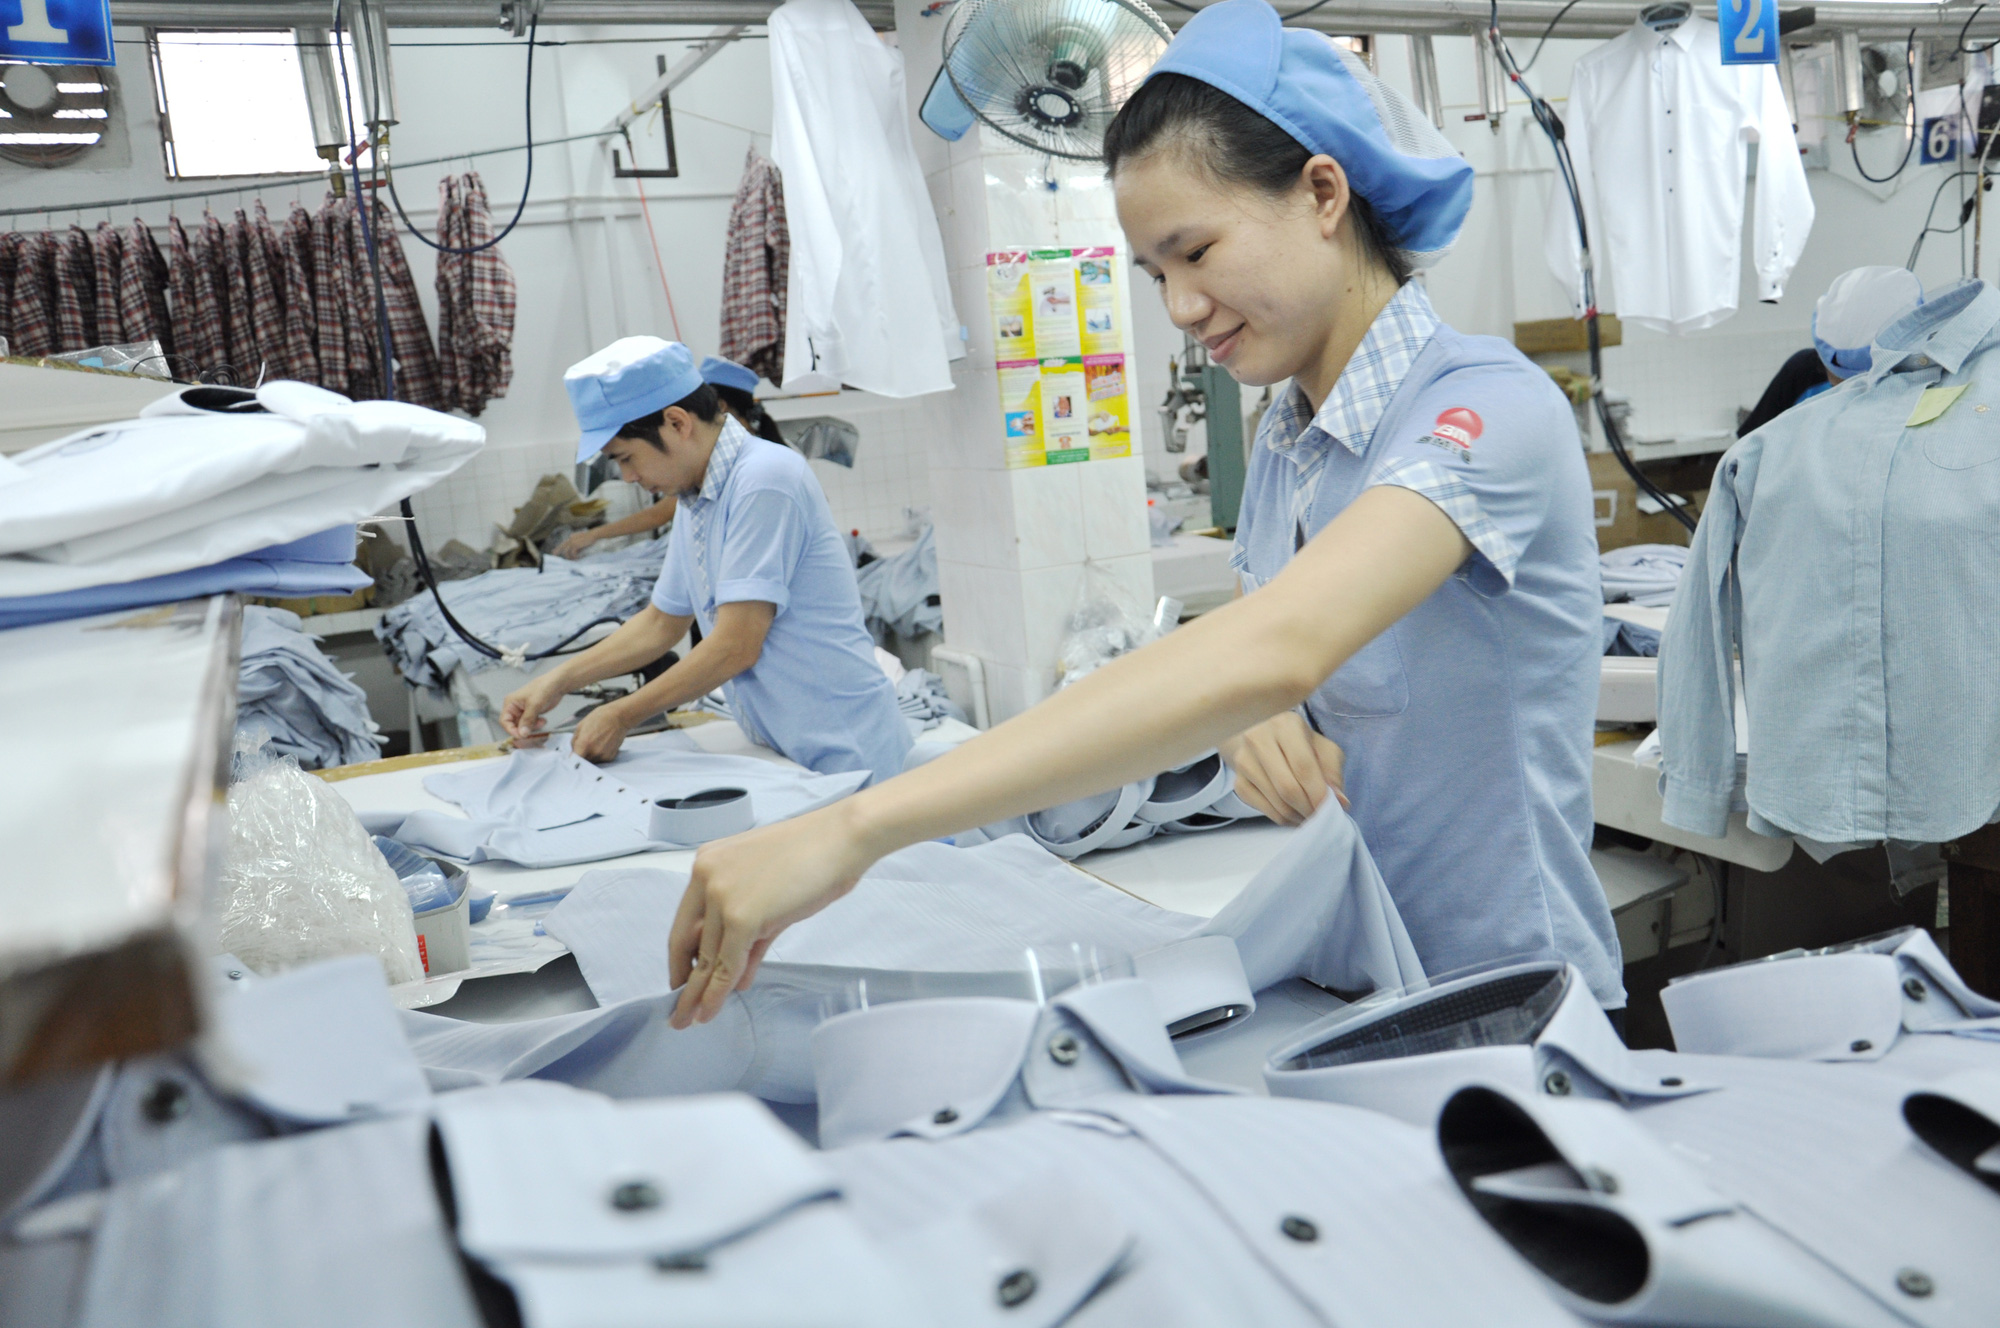 Workers make shirts at a garment factory in Vietnam. Photo: T.V.N. / Tuoi Tre